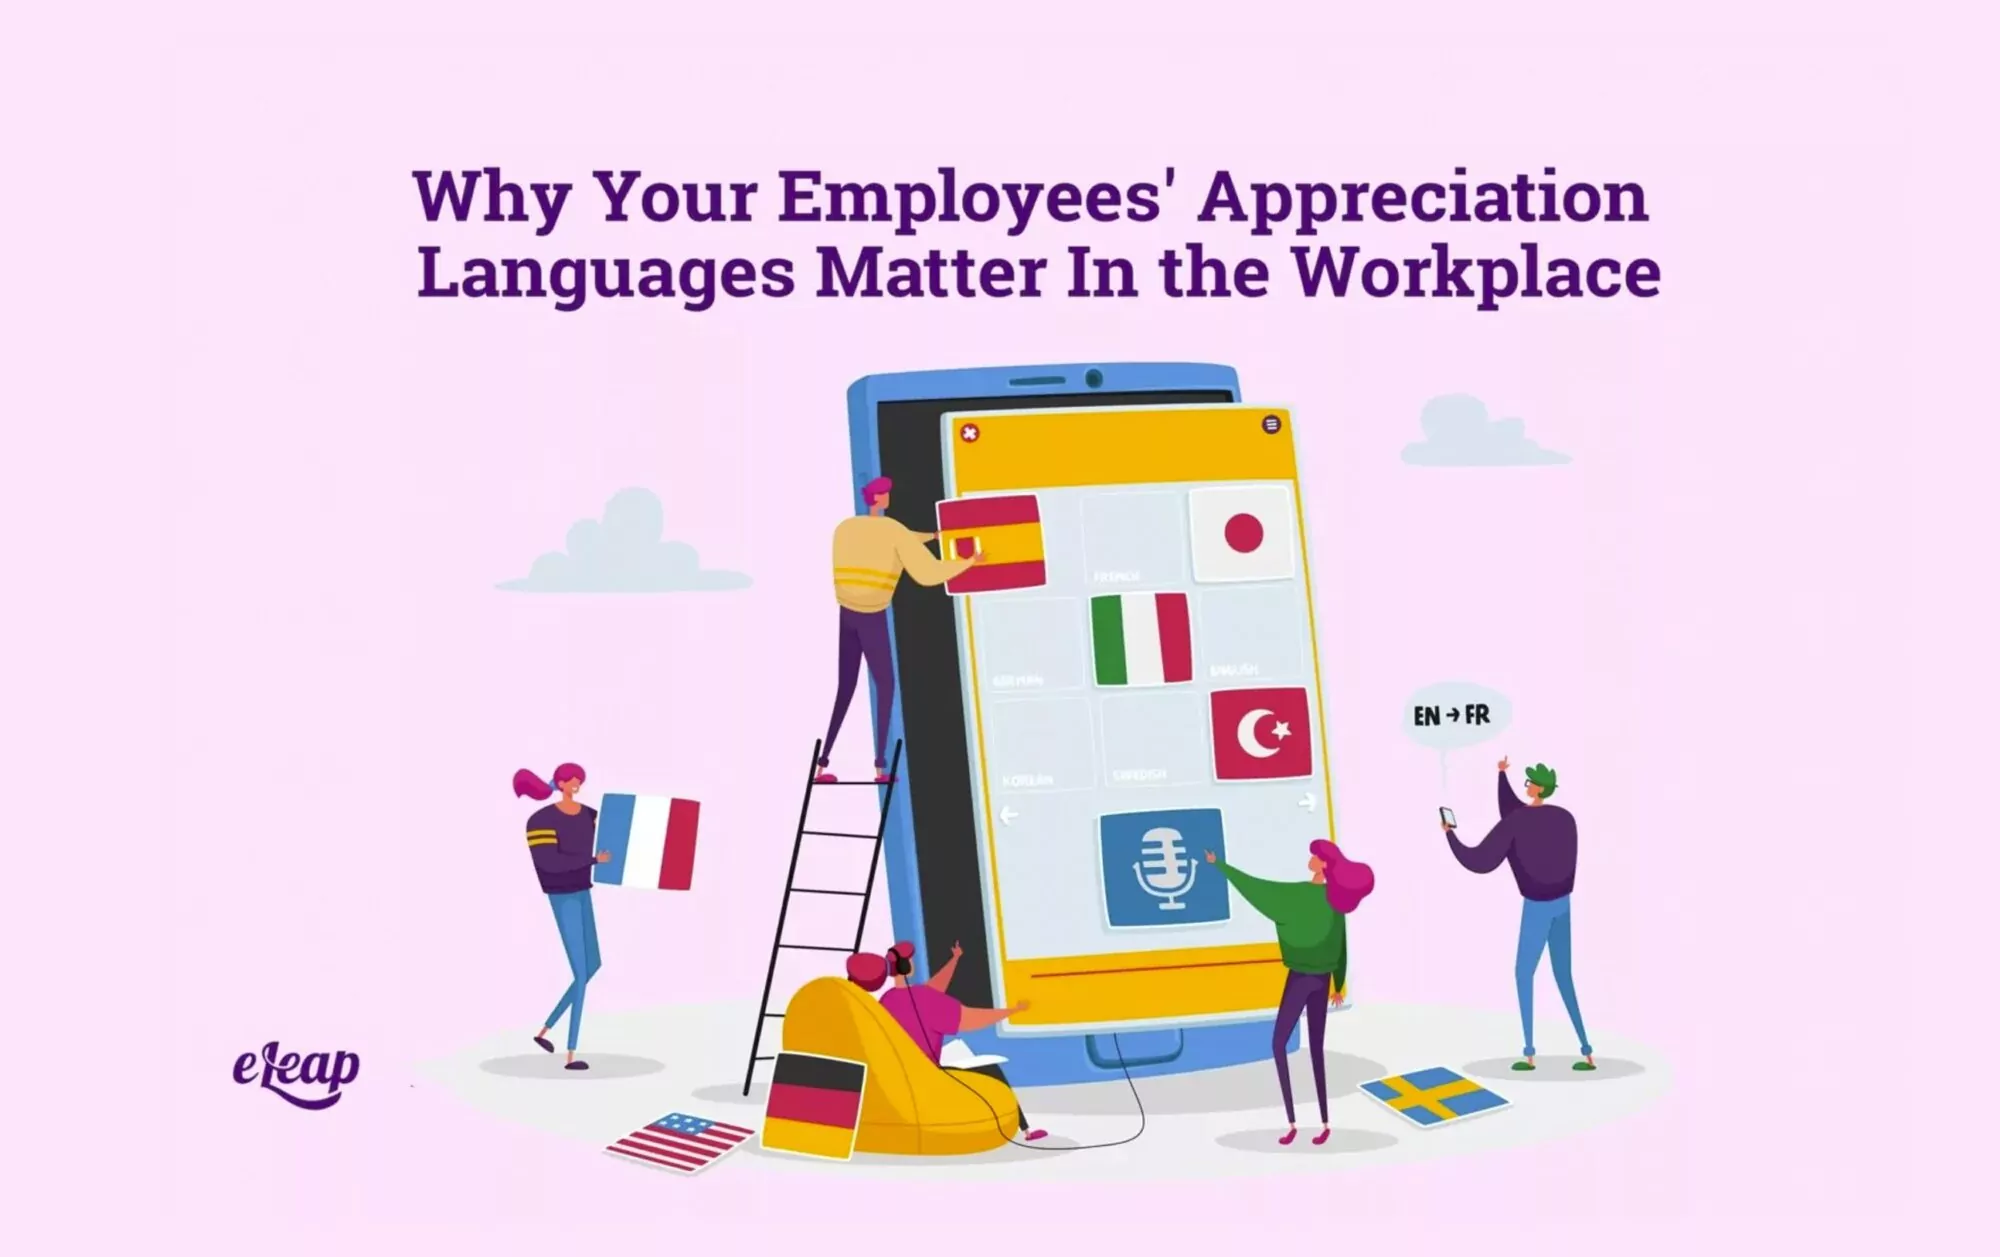 Why Your Employees’ Appreciation Languages Matter In the Workplace